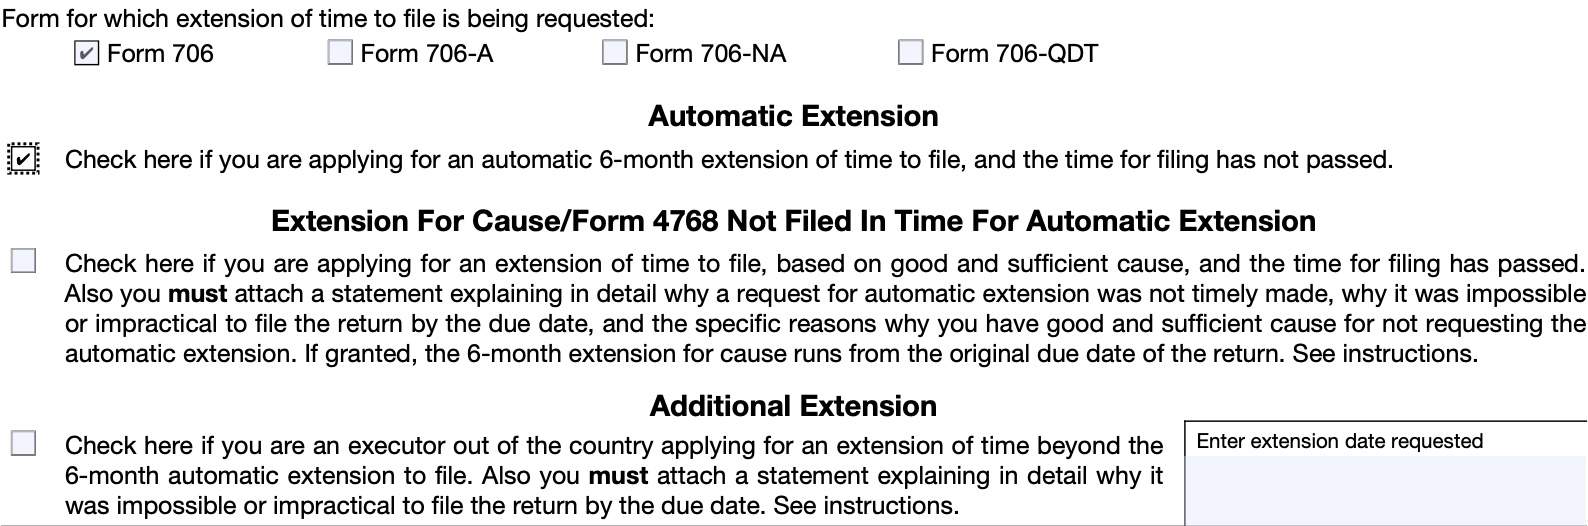 IRS Form 4768, part ii: Extension of Time To File Form 706, 706-A, 706 NA, or 706-QDT (Section 6081)